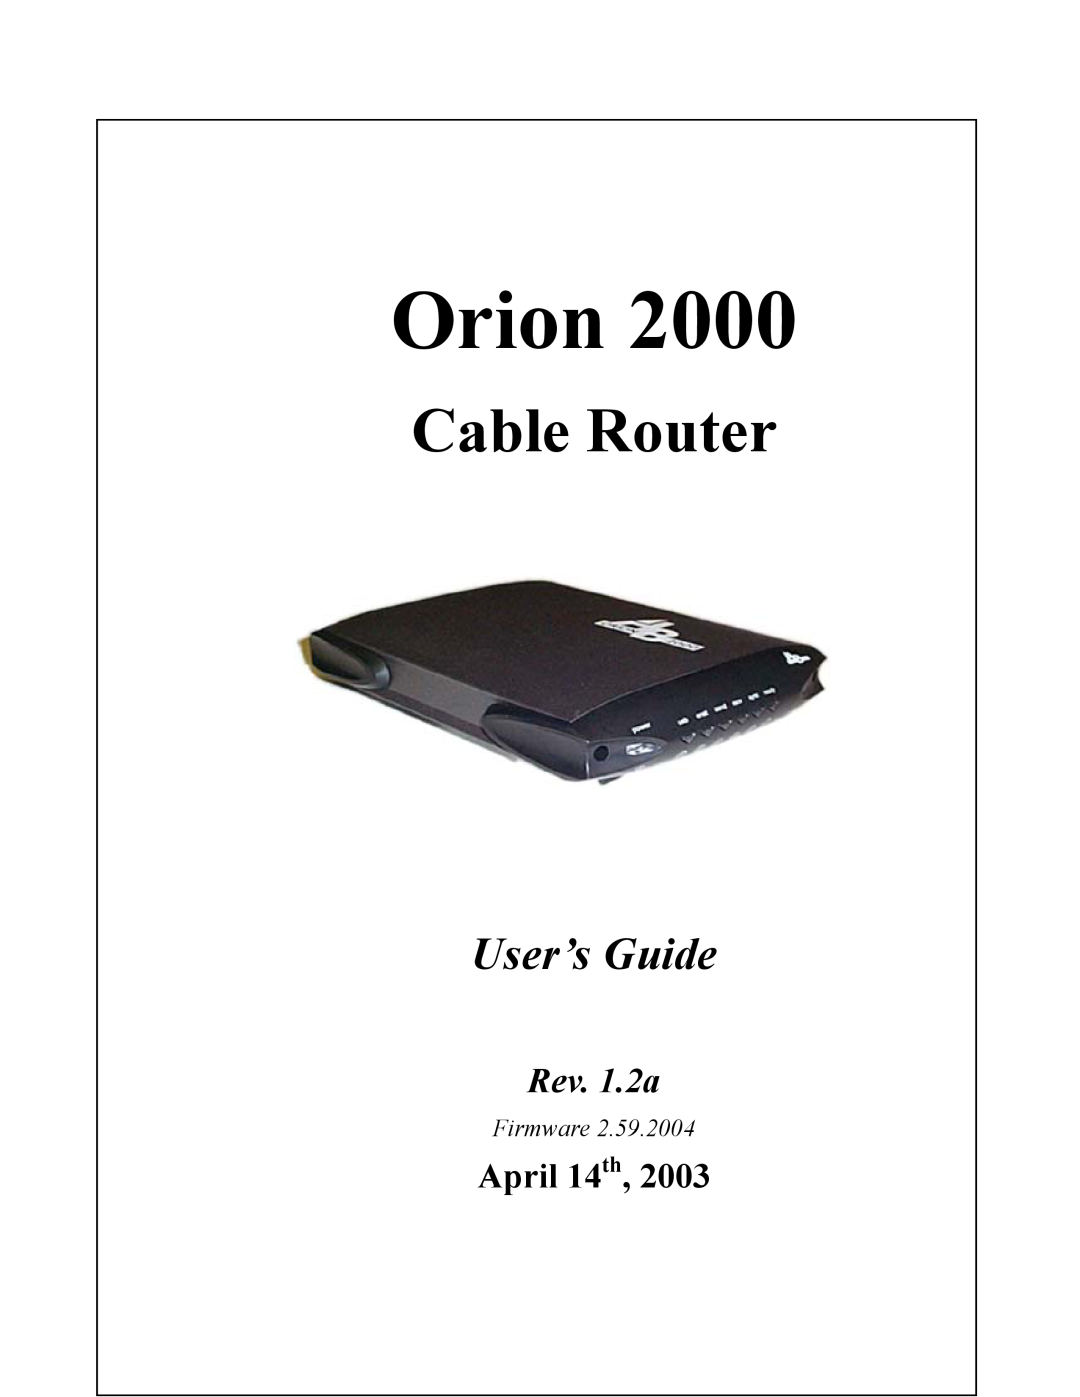 Orion 2000 manual Orion, Cable Router, User’s Guide, Rev. 1.2a, April 14th, Firmware 